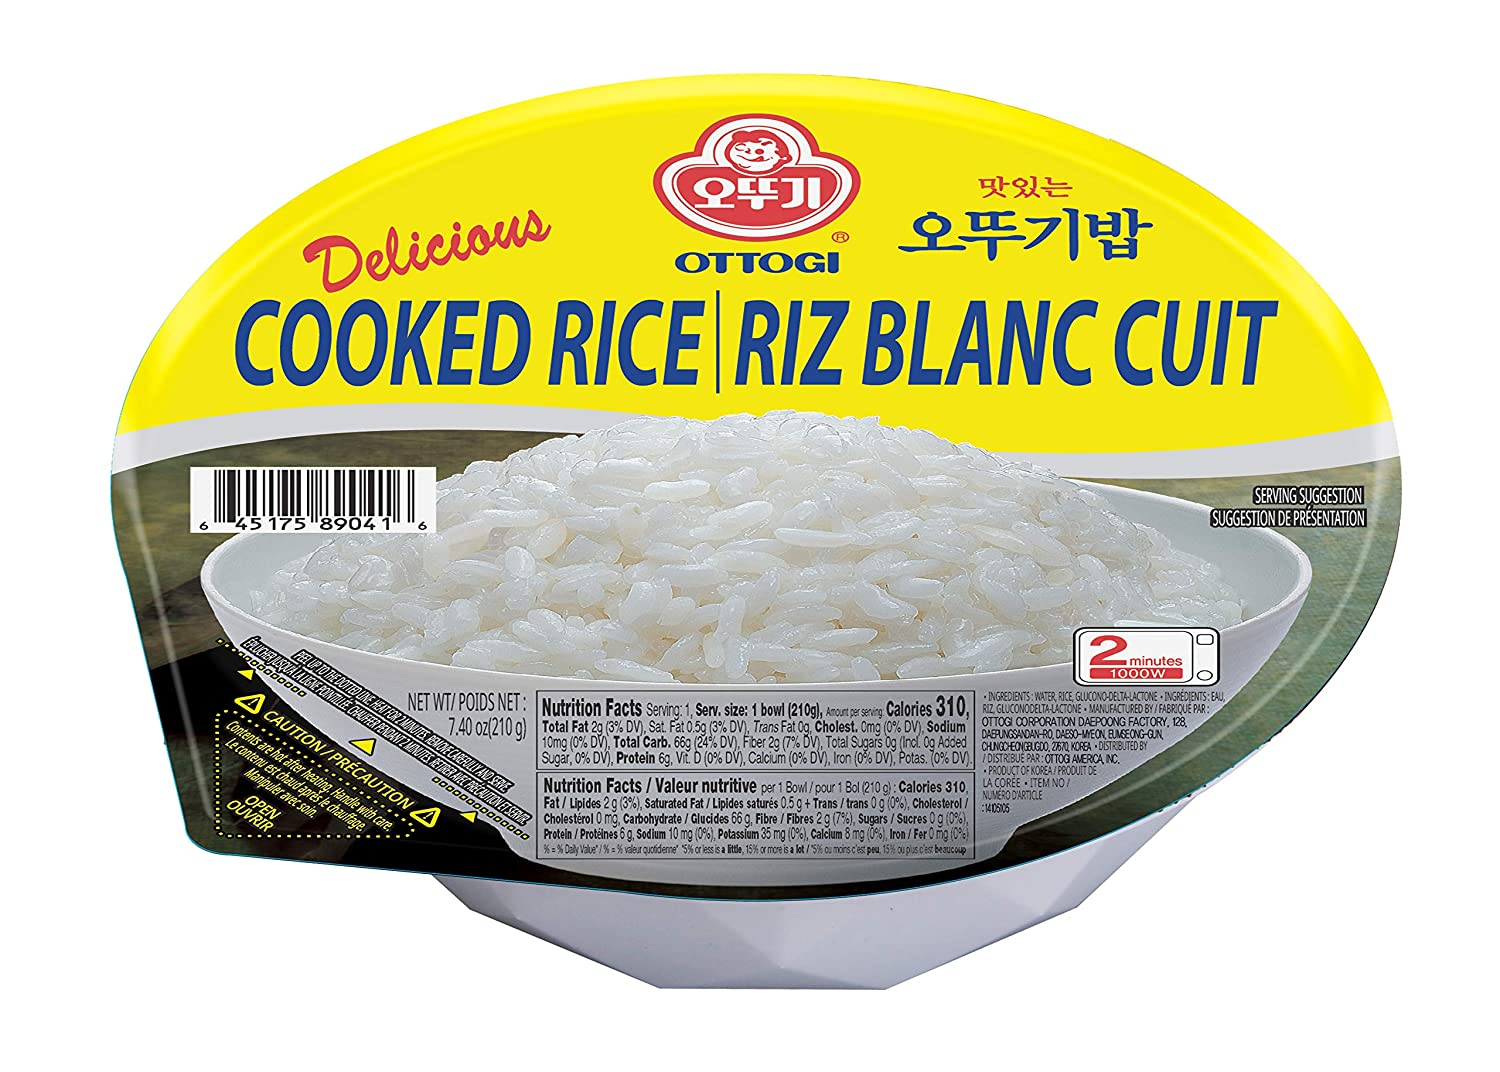 Microwavable instant cooked rice